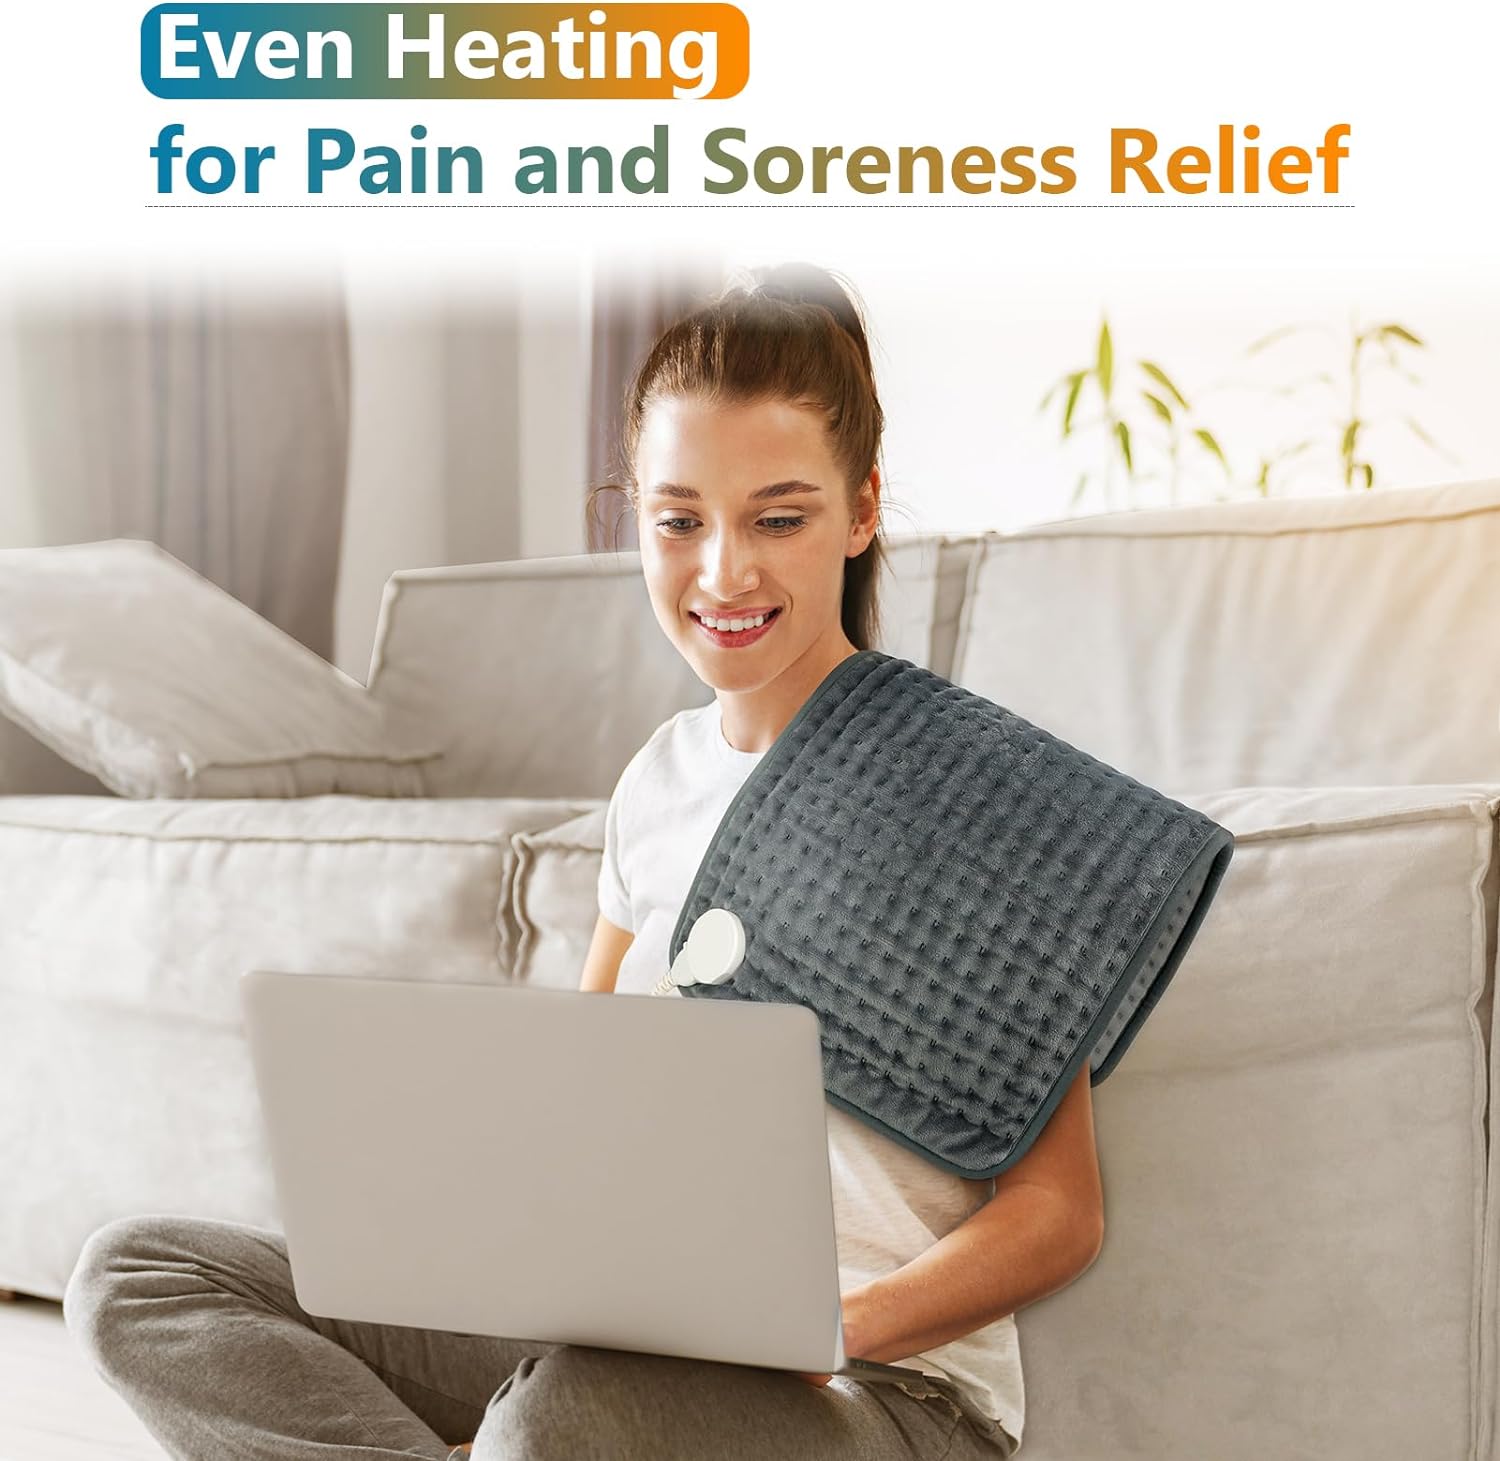 Comfytemp Heating Pad for Back Pain & Cramps Relief, FSA HSA Eligible Electric Heating Pads Large